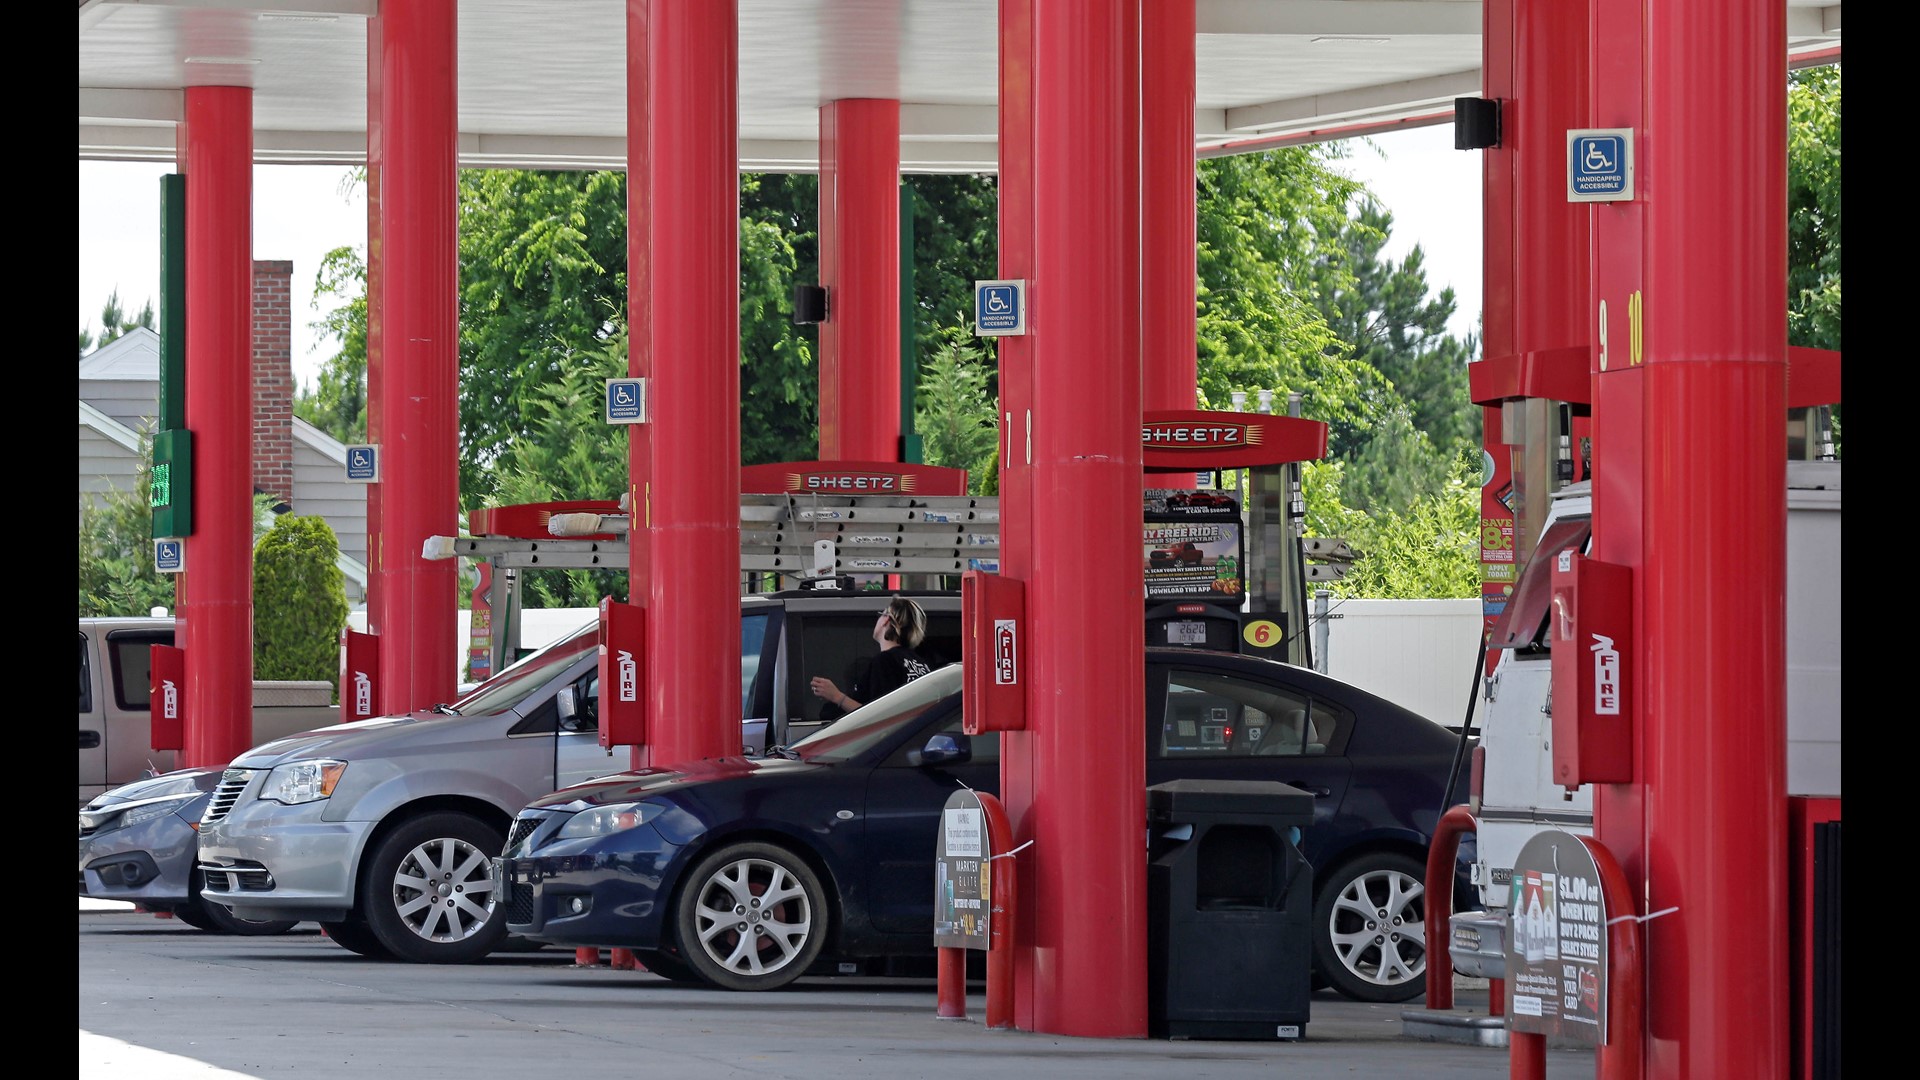 In addition, E85 will be $3.49 per gallon, Sheetz said Monday. Here's how to tell if your car can use Unleaded 88 or E85 gas.